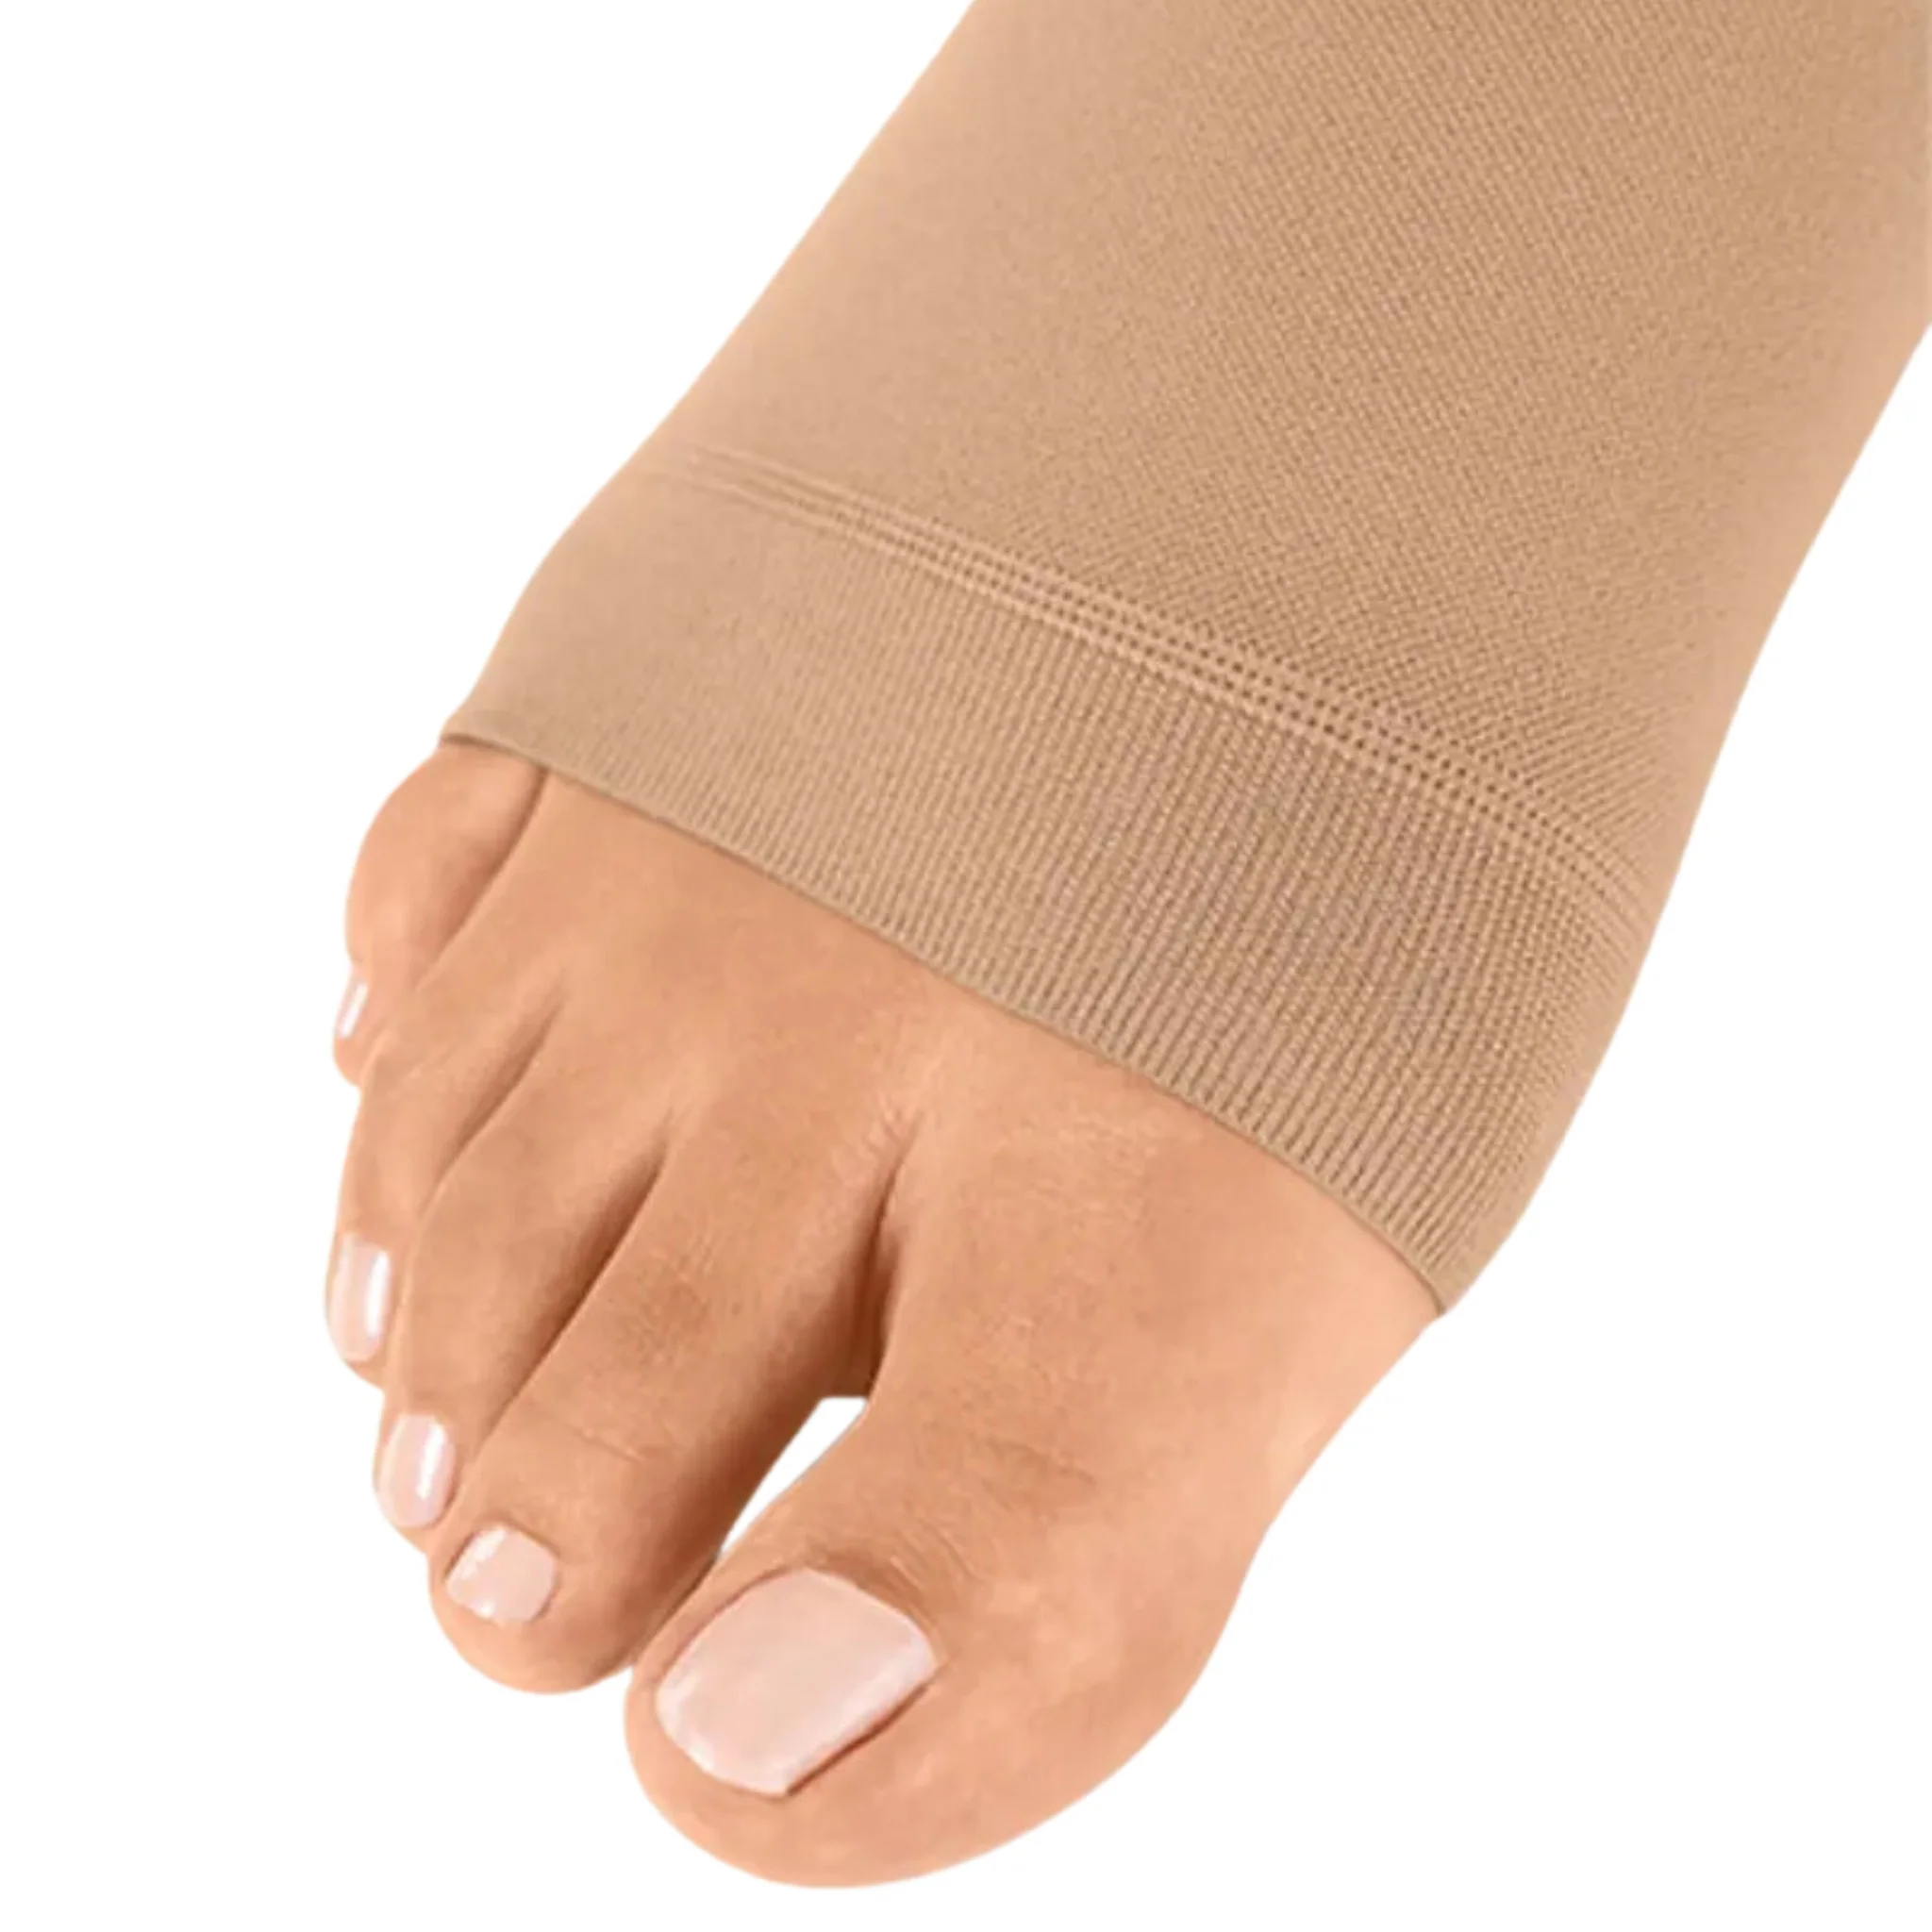 Anthracite knee below compression stockings CCL2, open toe mediven